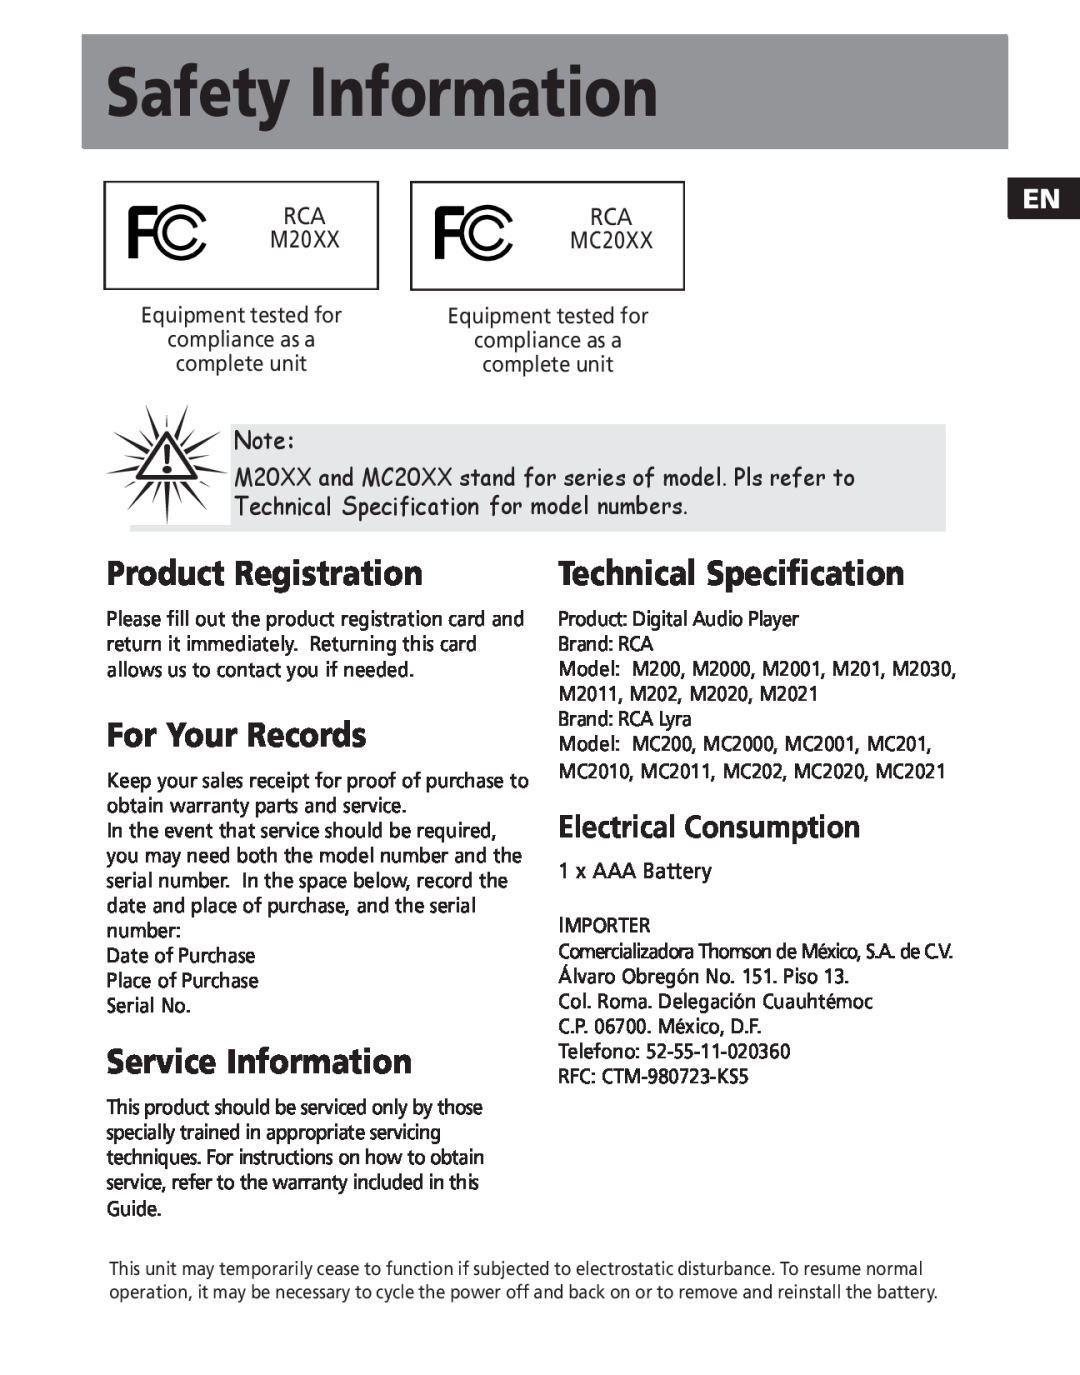 RCA M200, M2030 Safety Information, Product Registration, For Your Records, Service Information, Technical Specification 